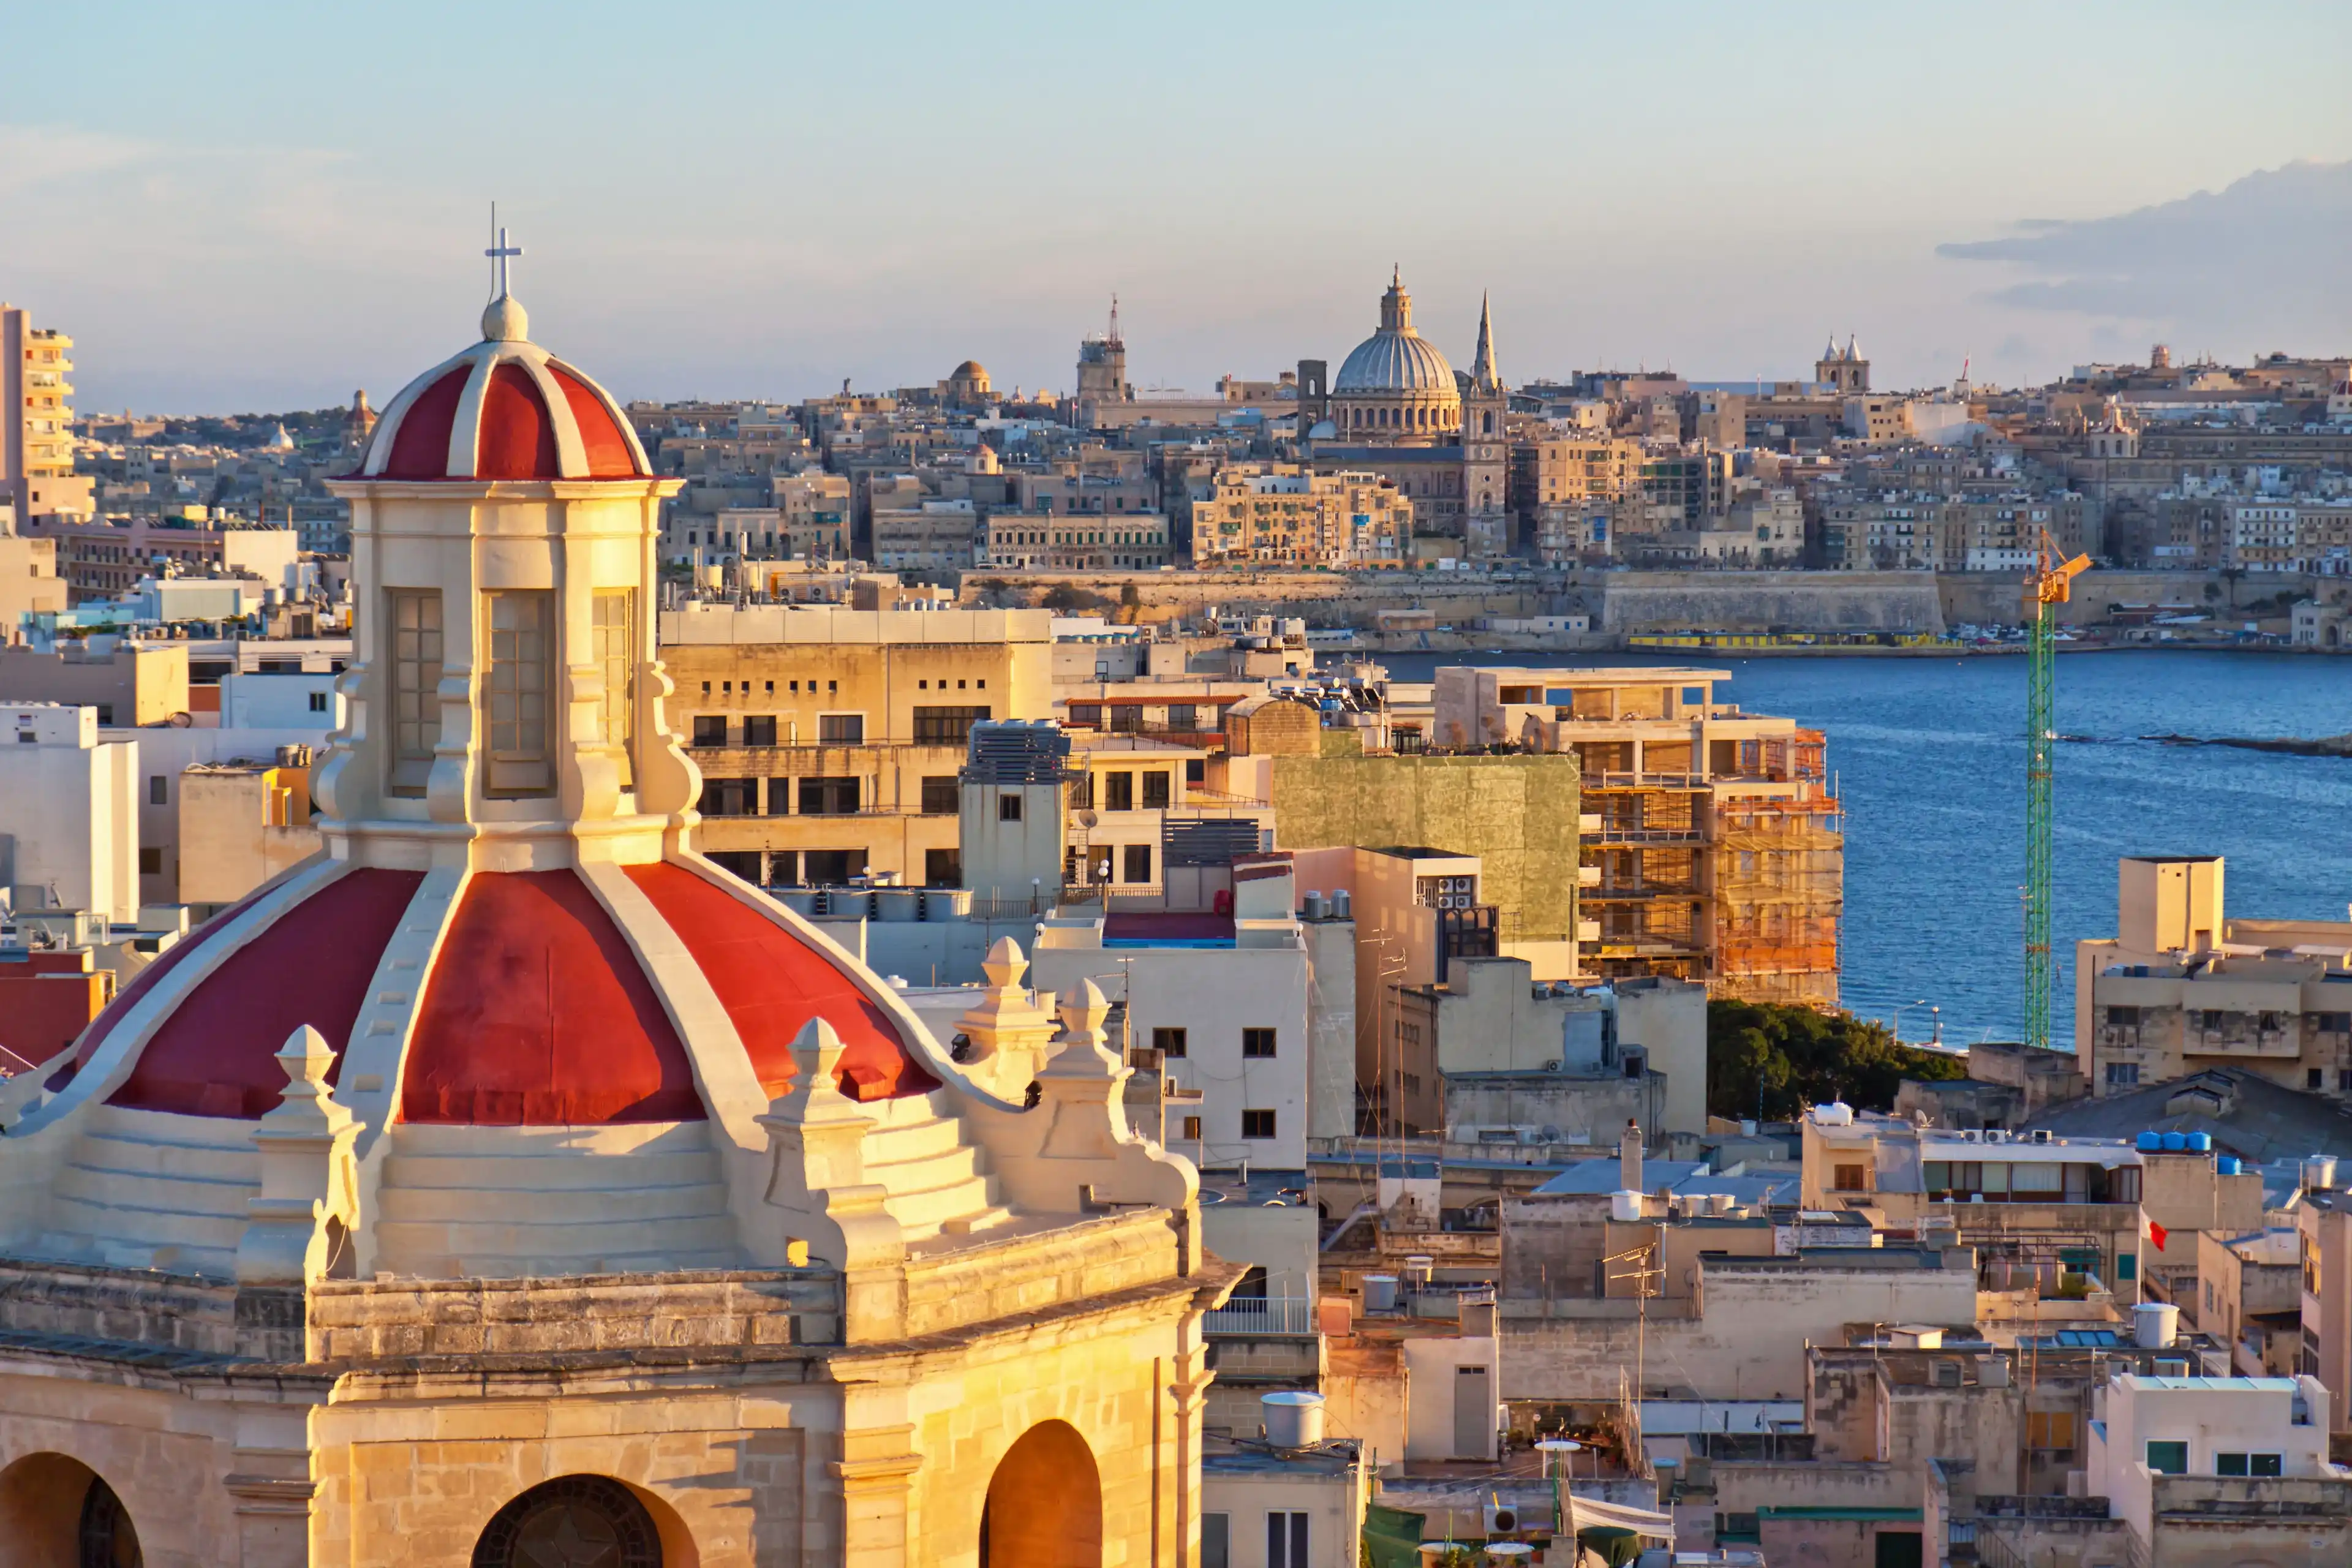 View from The Palace Hotel in Sliema with the churchs roof filling the frame